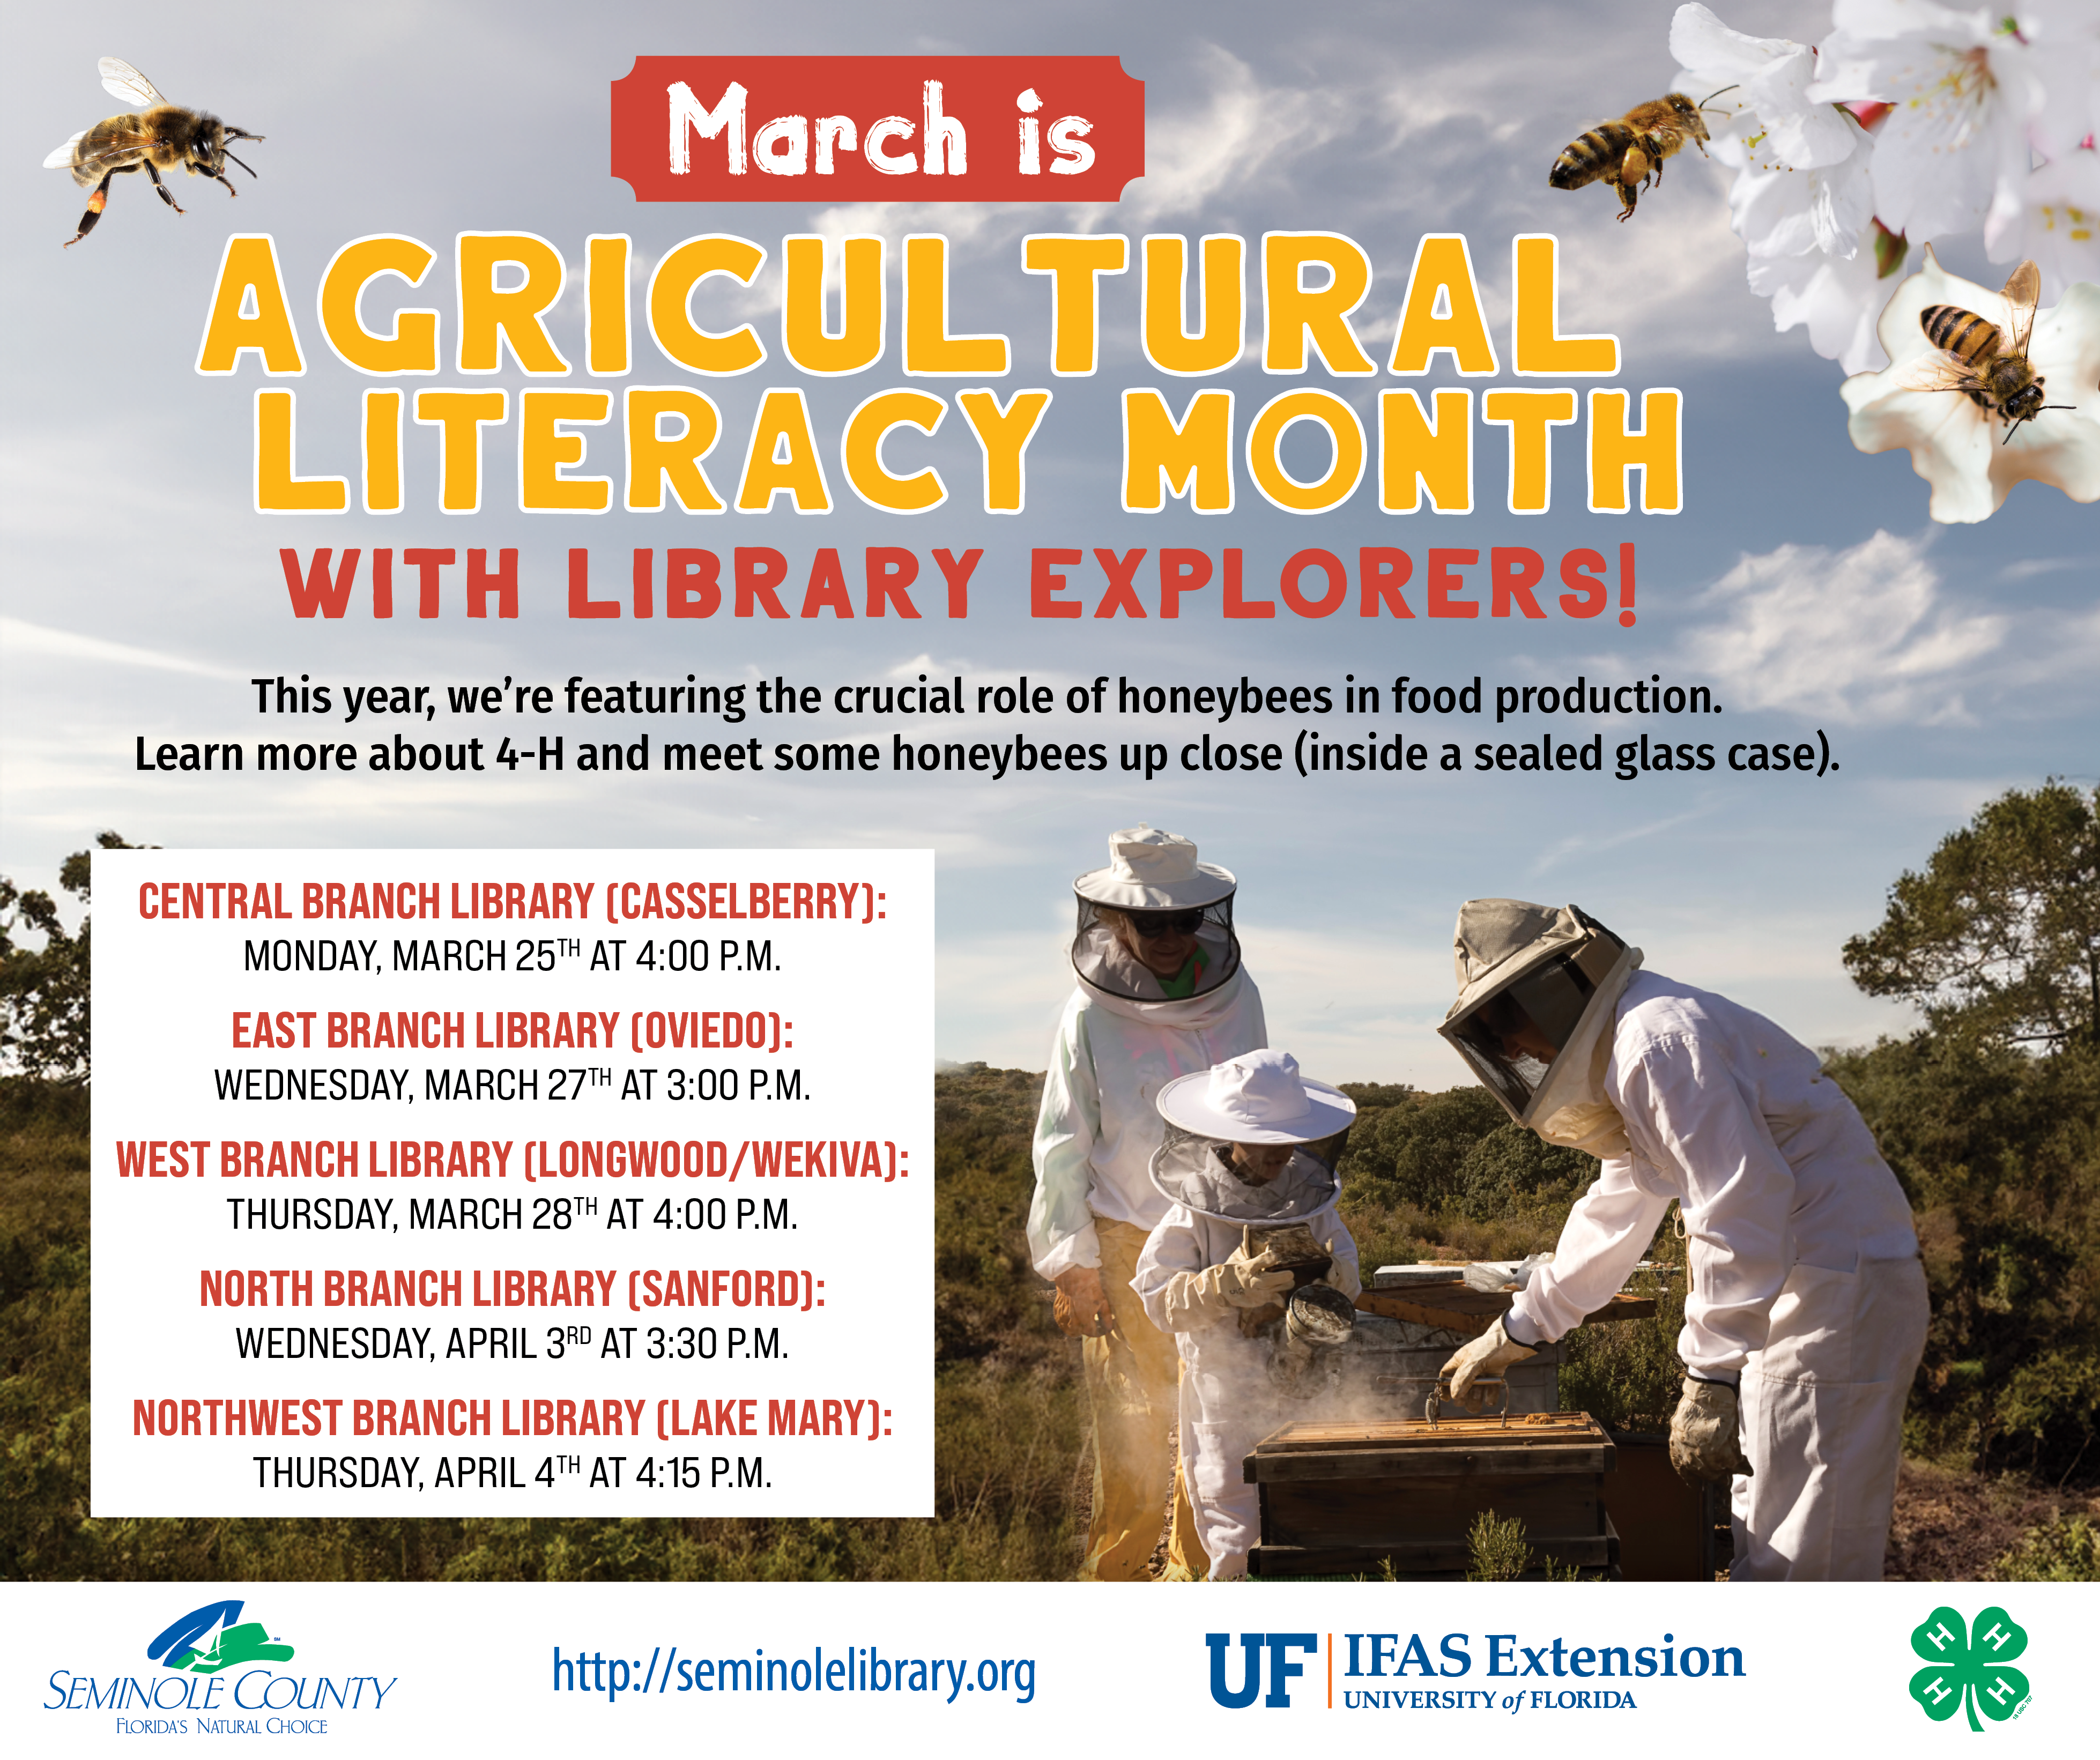 March is Ag Literacy Month with Library Explorers